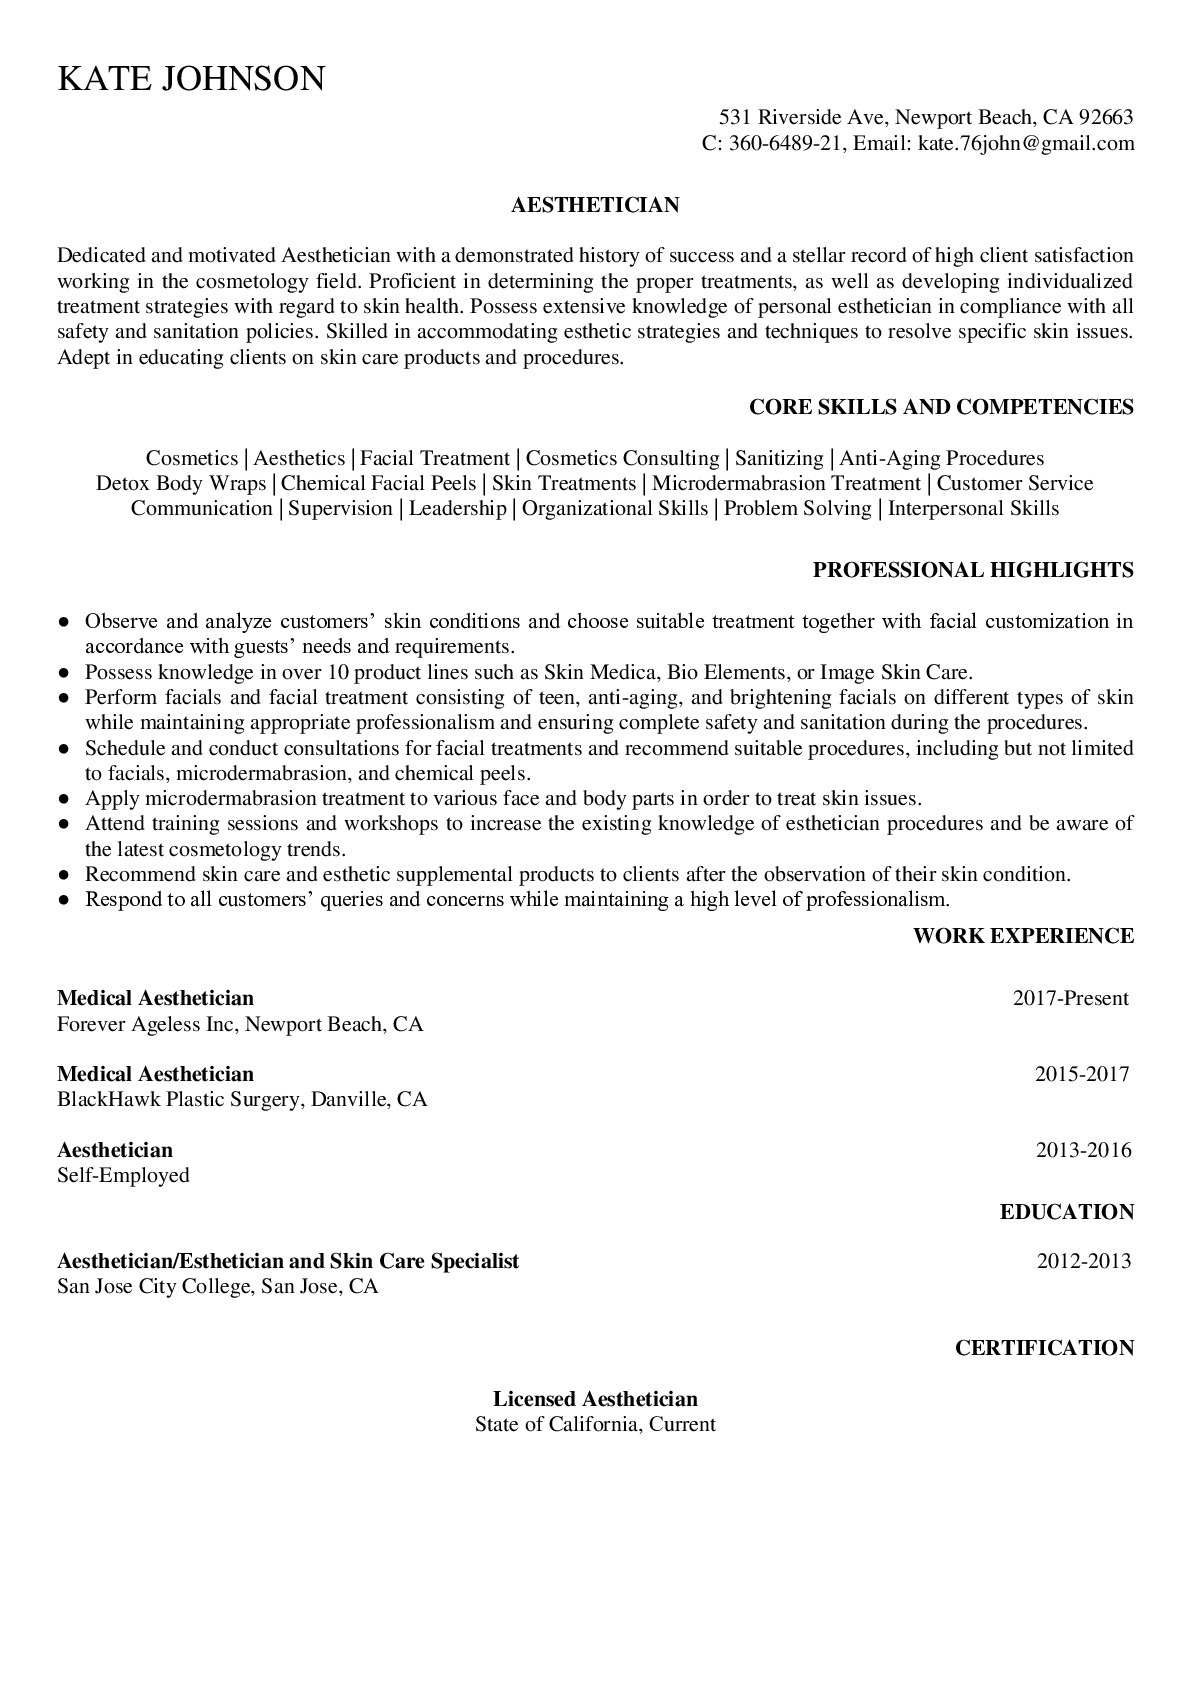 Resume Example for Aesthetician